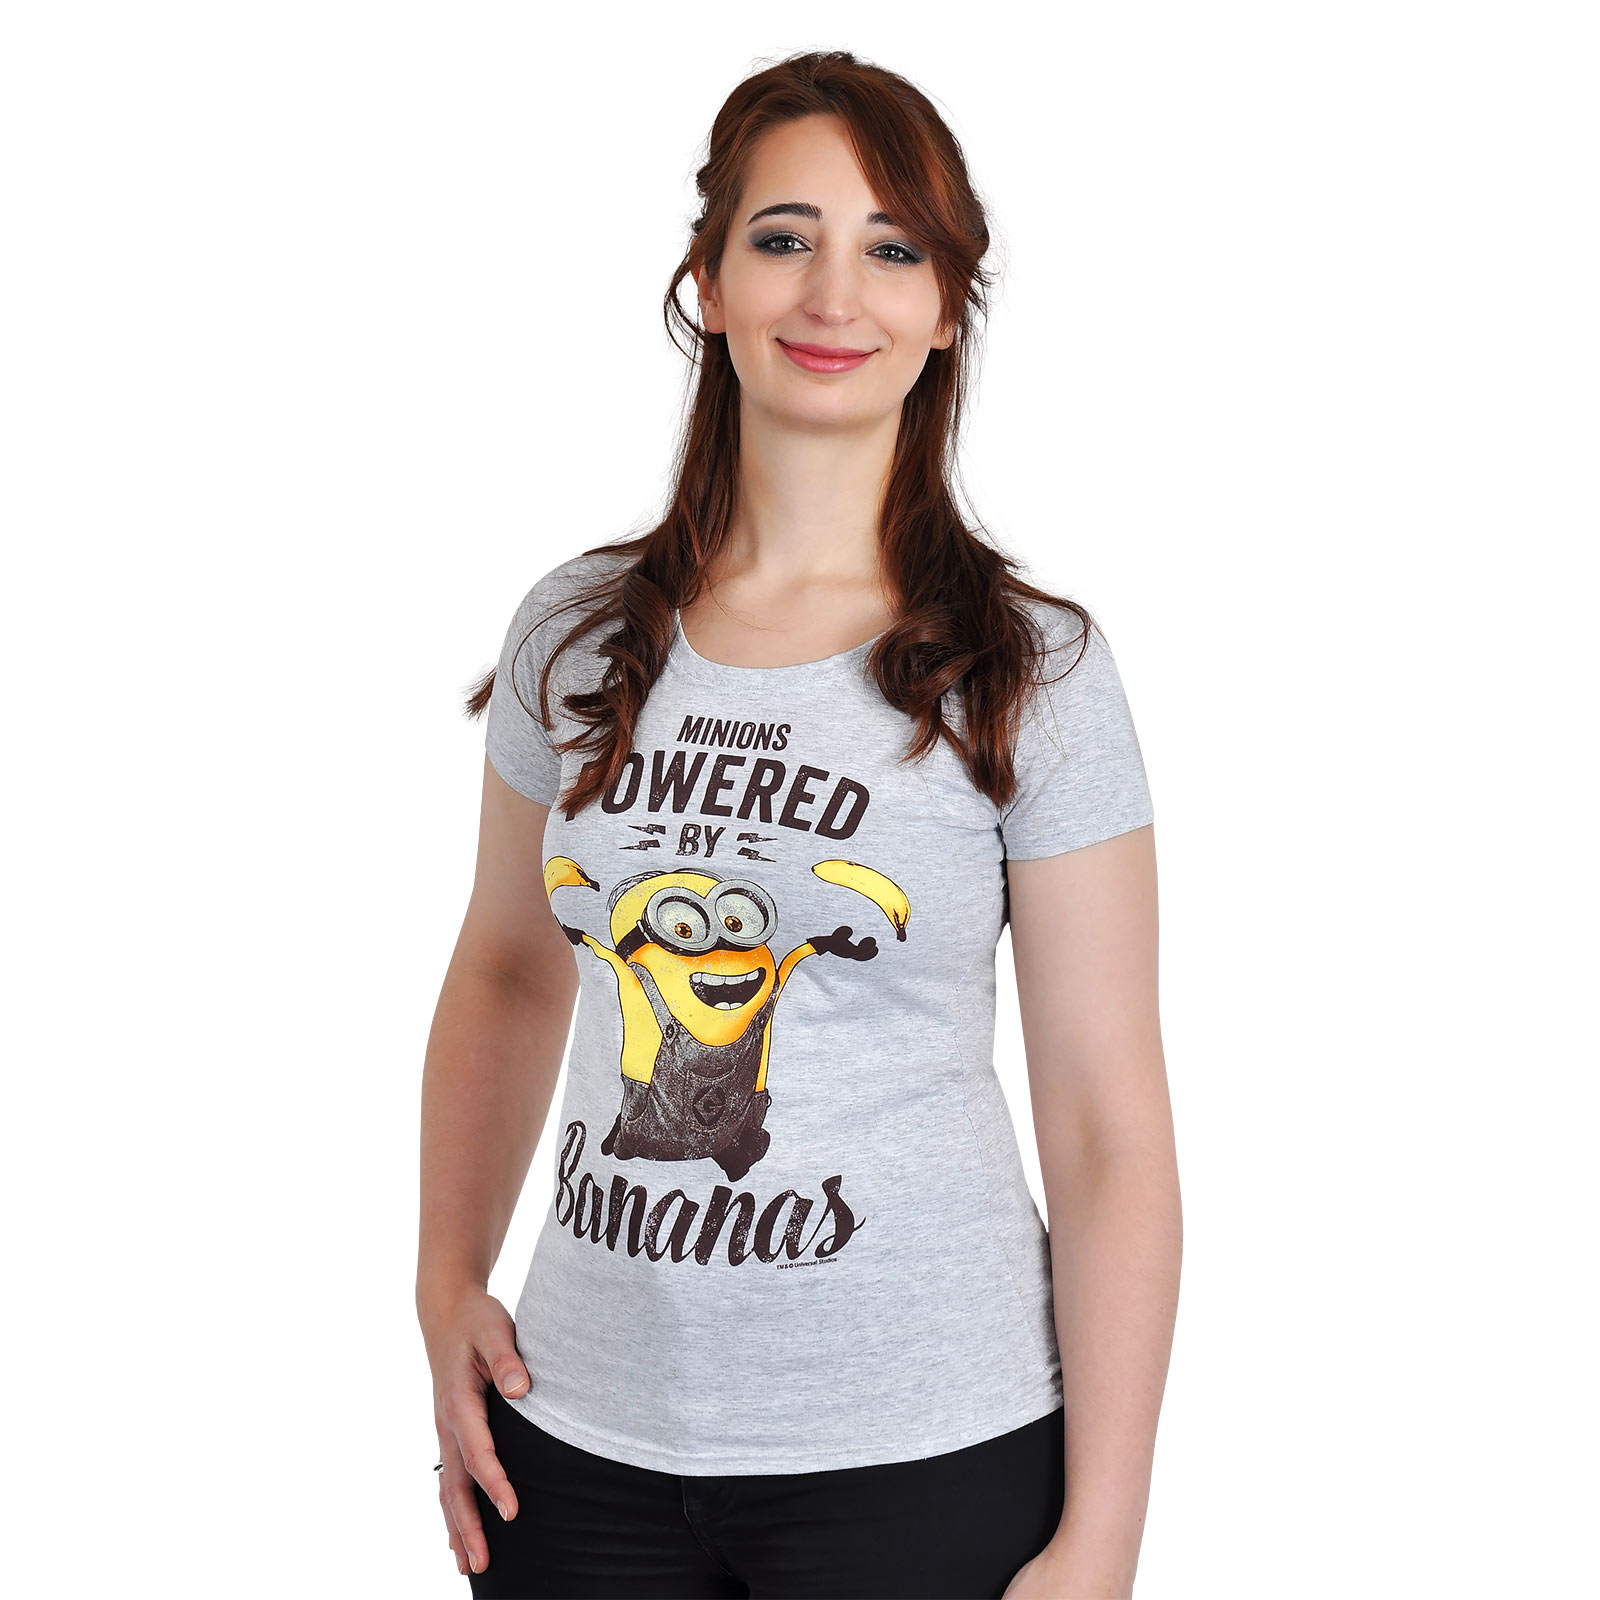 Minions - T-shirt pour filles 'Powered By Bananas' gris